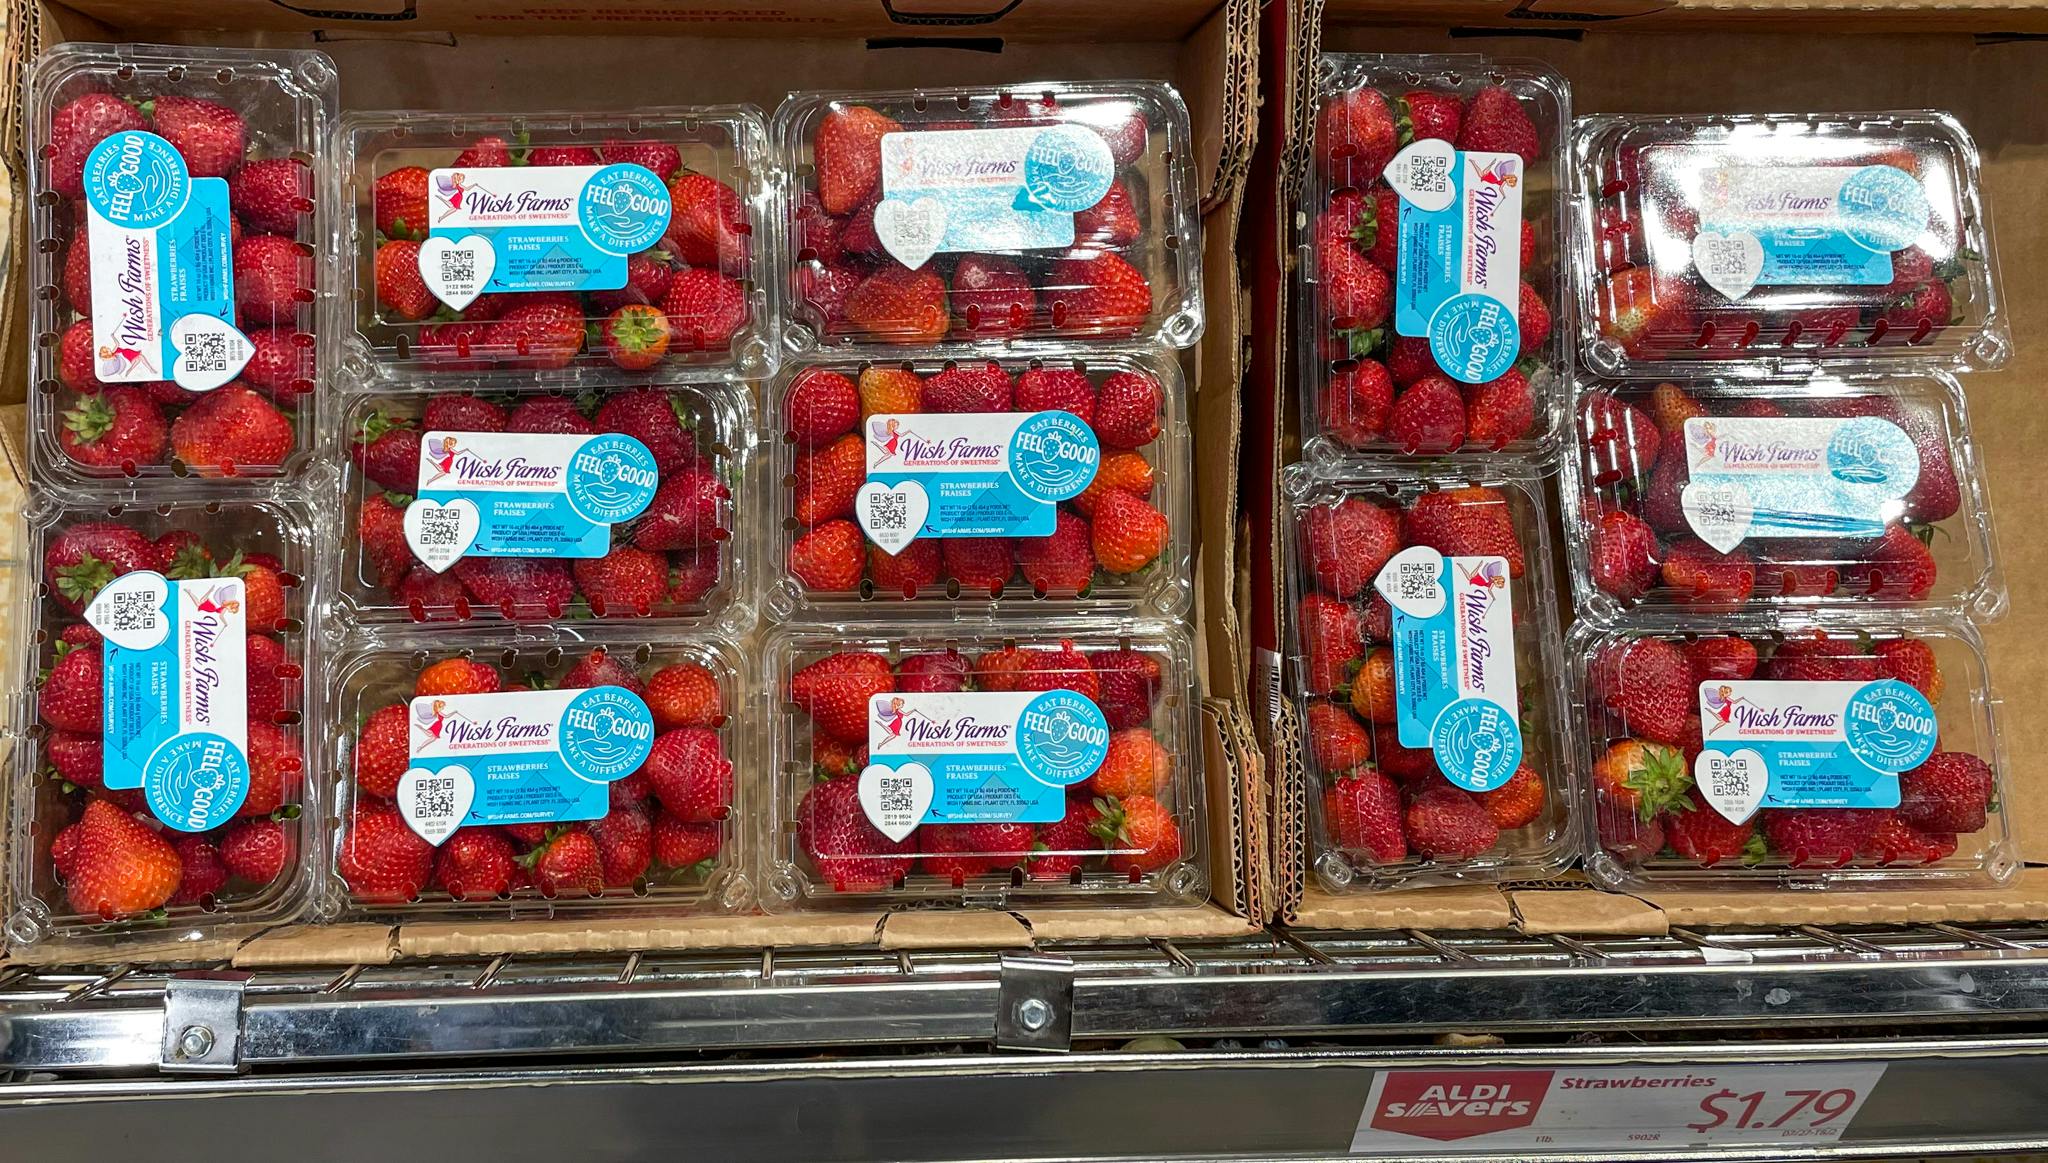 packaged strawberries at aldi with sales tag